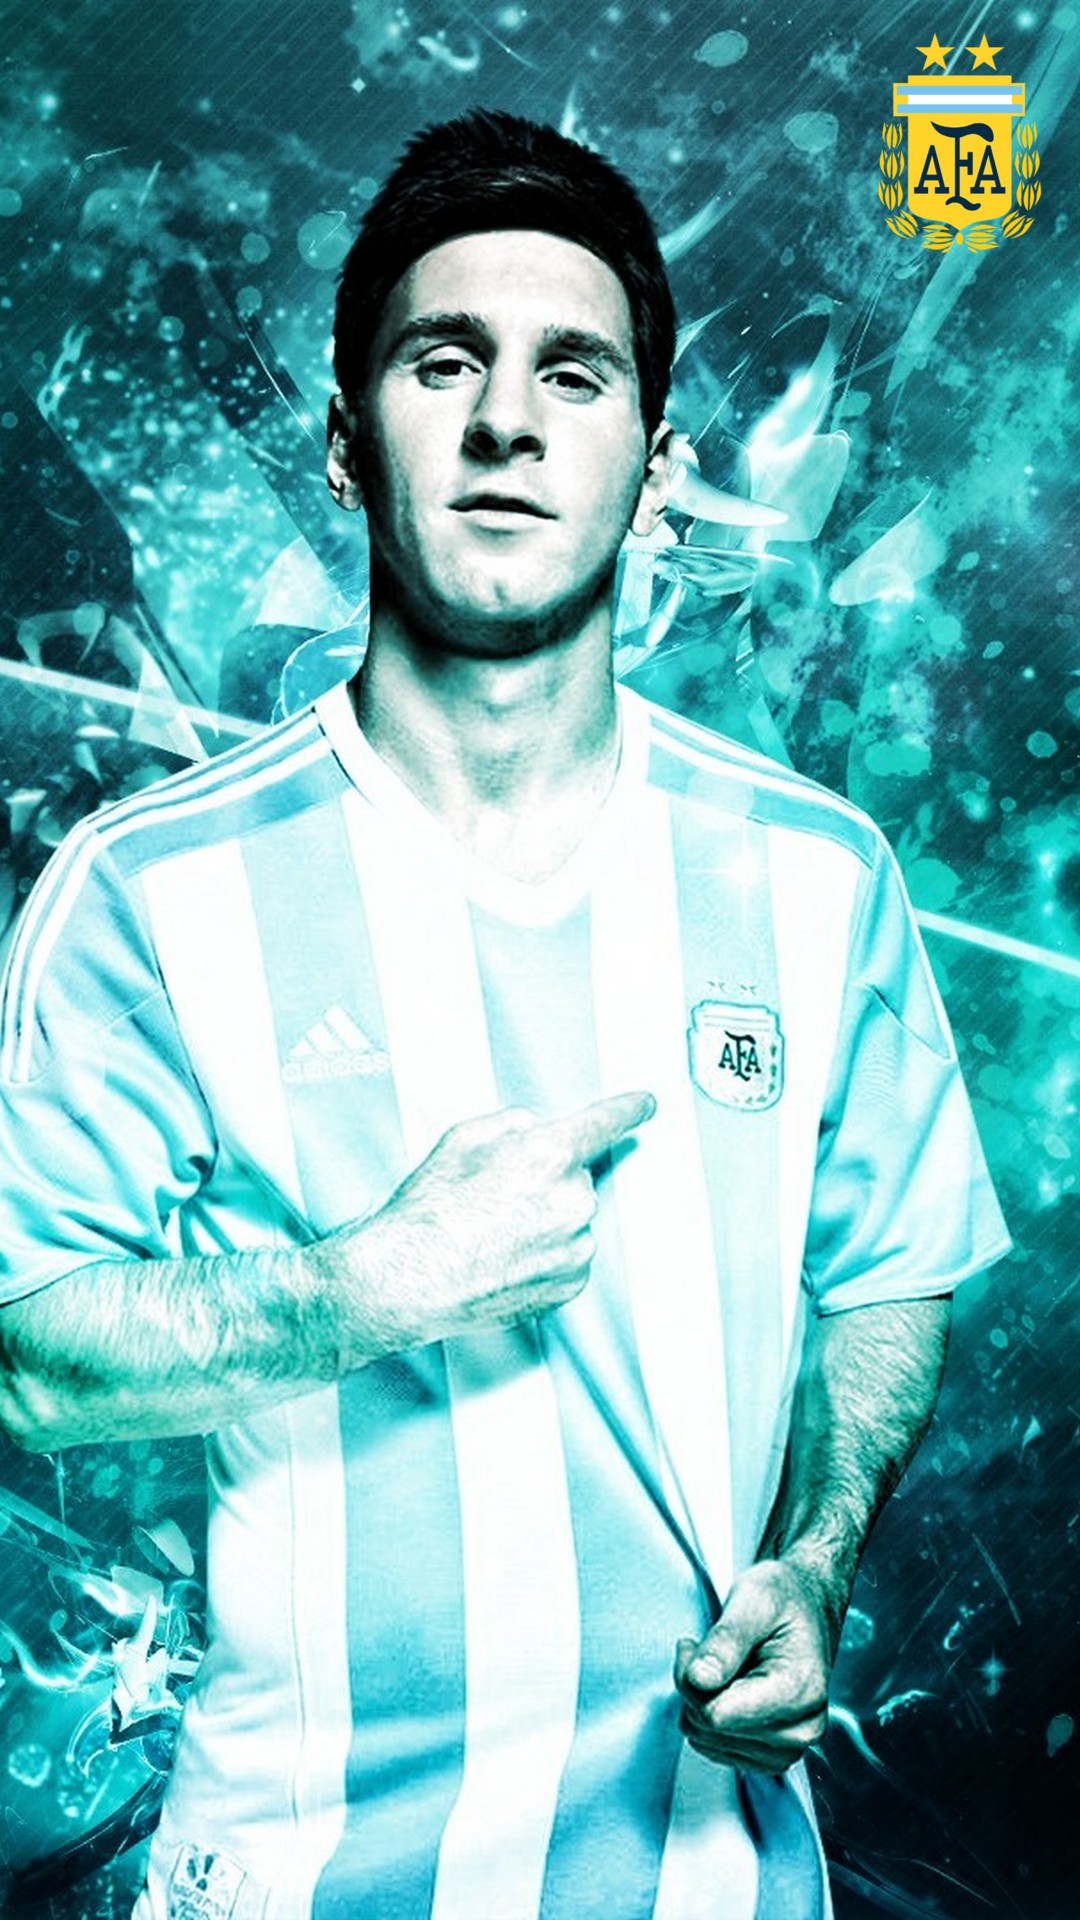 iPhone Wallpaper HD Messi Argentina With Resolution 1080X1920 pixel. You can make this wallpaper for your Mac or Windows Desktop Background, iPhone, Android or Tablet and another Smartphone device for free